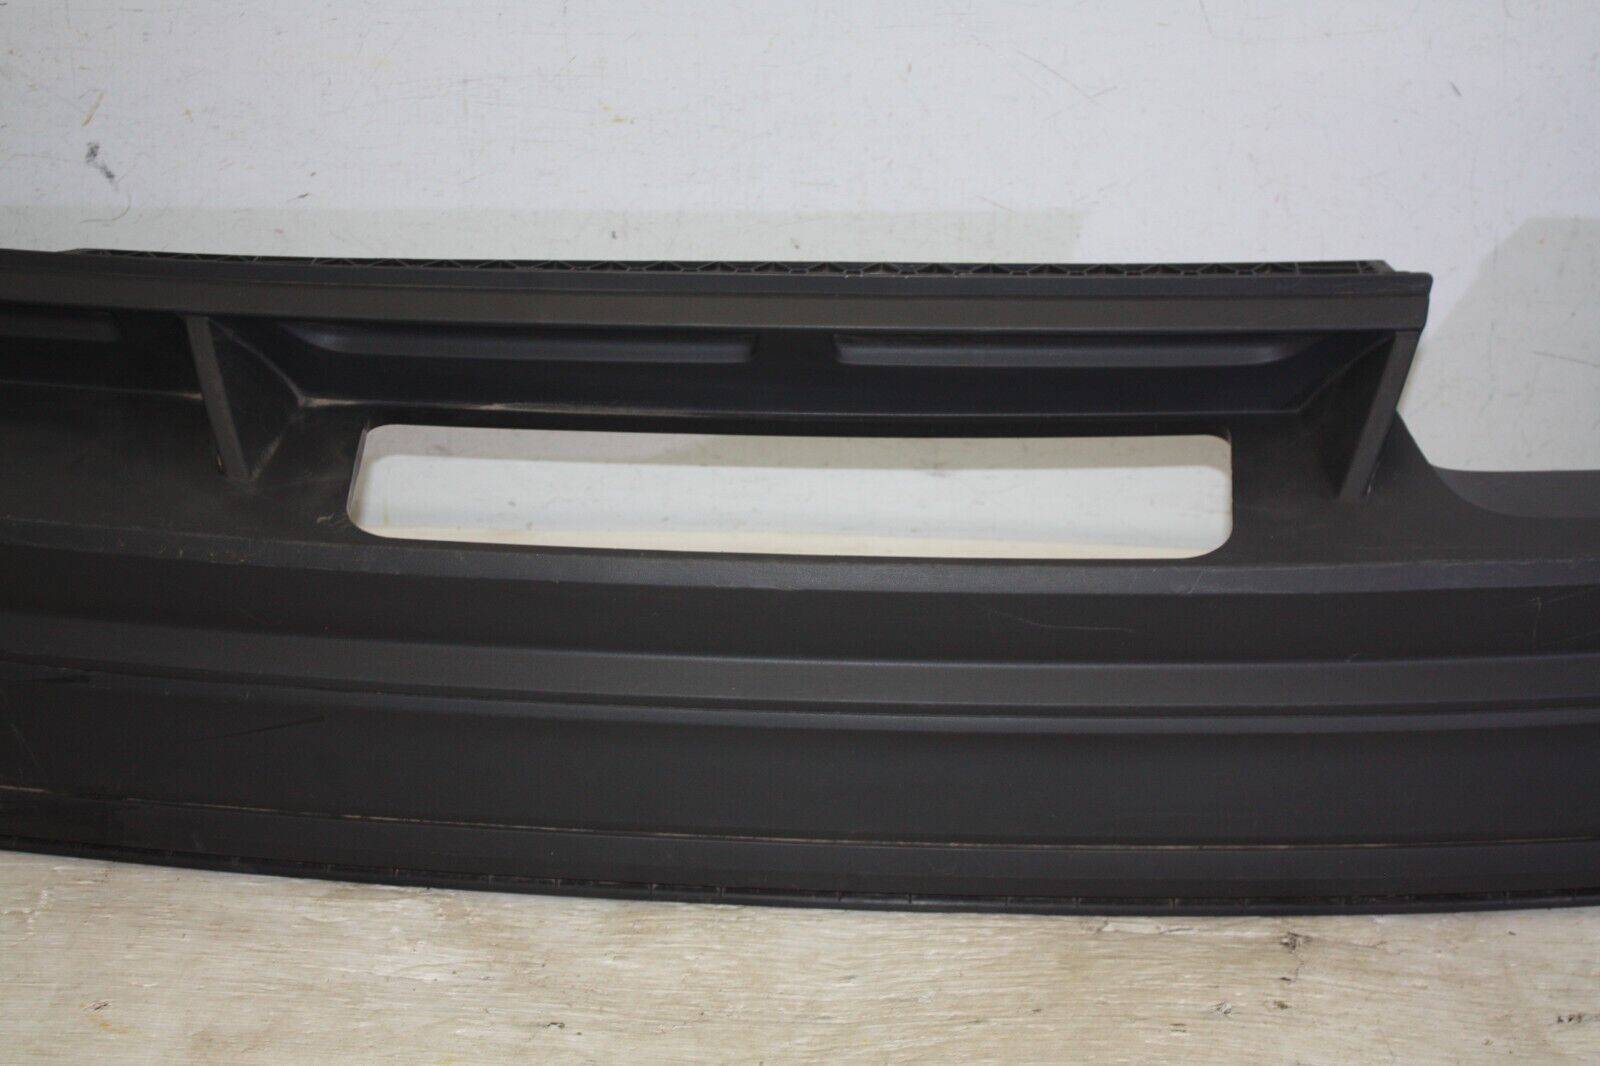 VW-Tiguan-Rear-Bumper-Lower-Section-2016-TO-2020-5NA807521-Genuine-176149756046-3